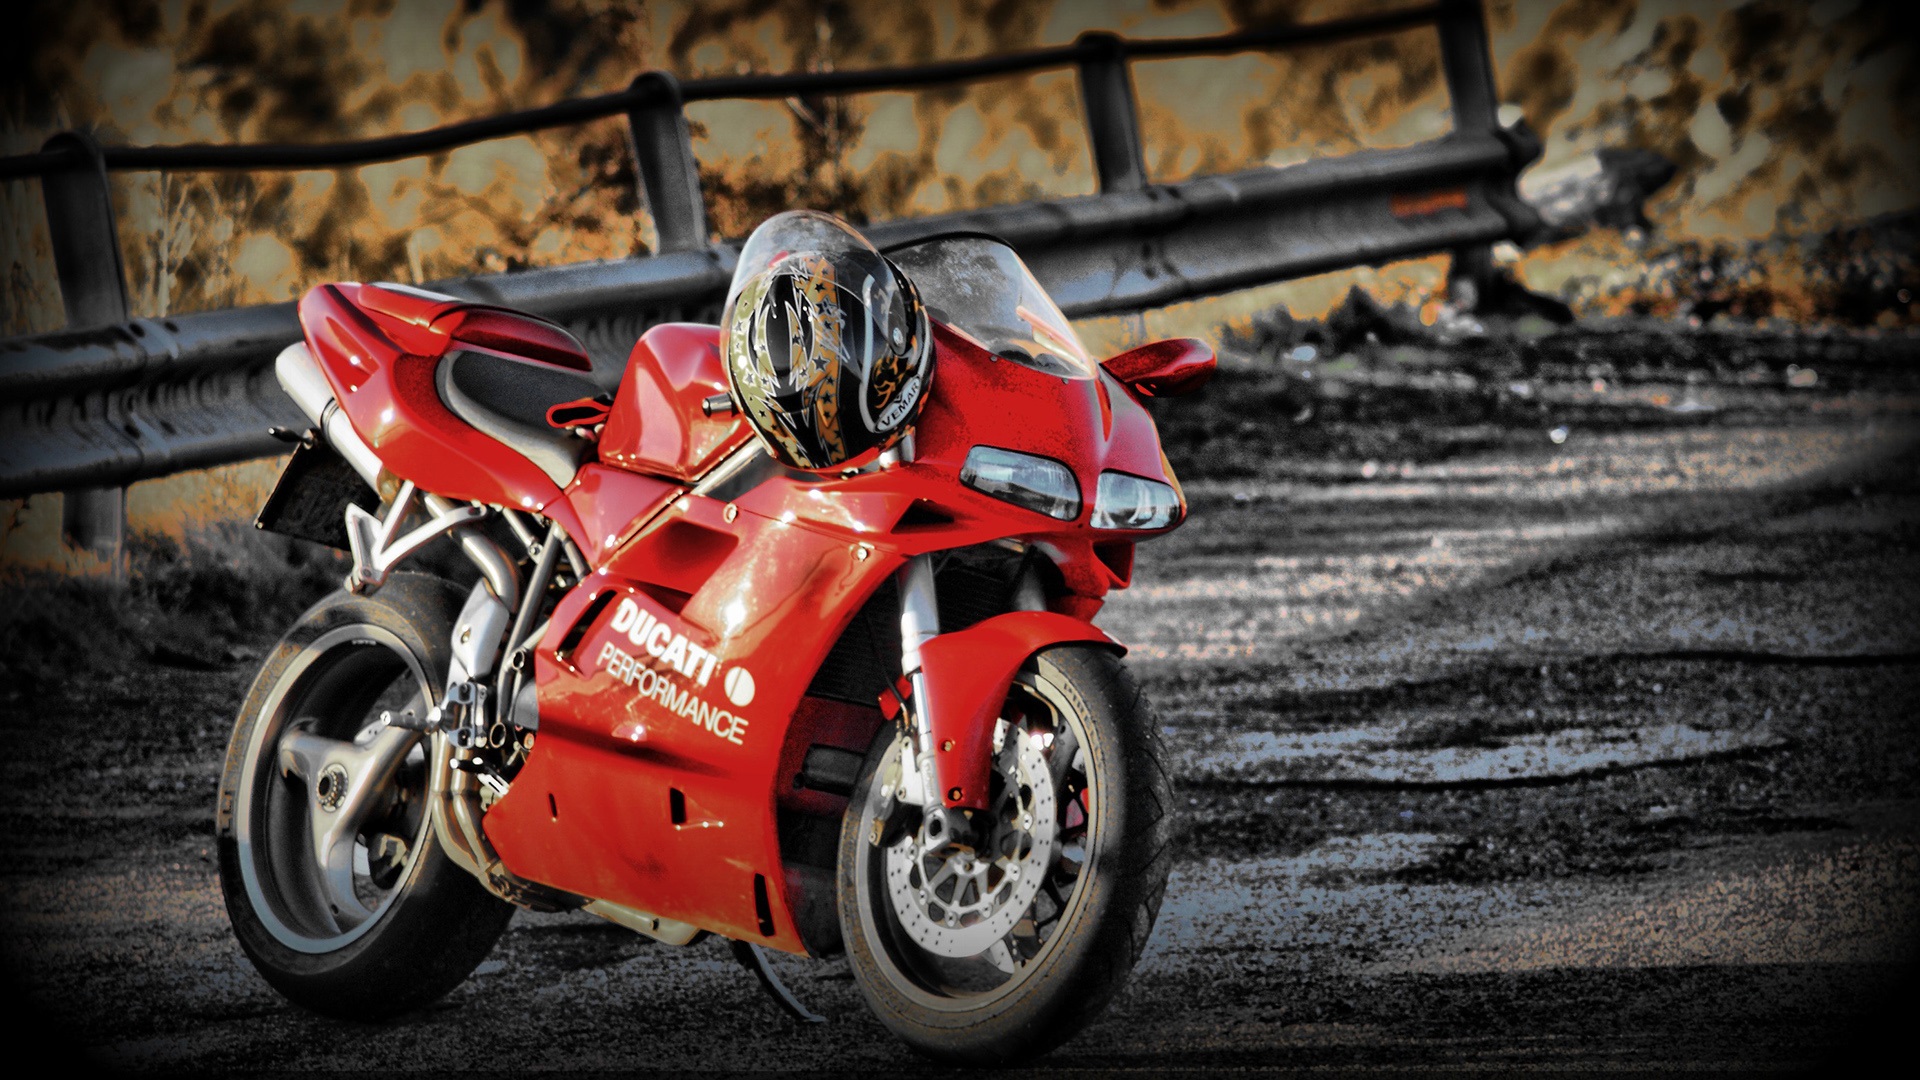 Wallpaper Ducati 748 red motorcycle 1920x1080 Full HD 2K Picture, Image